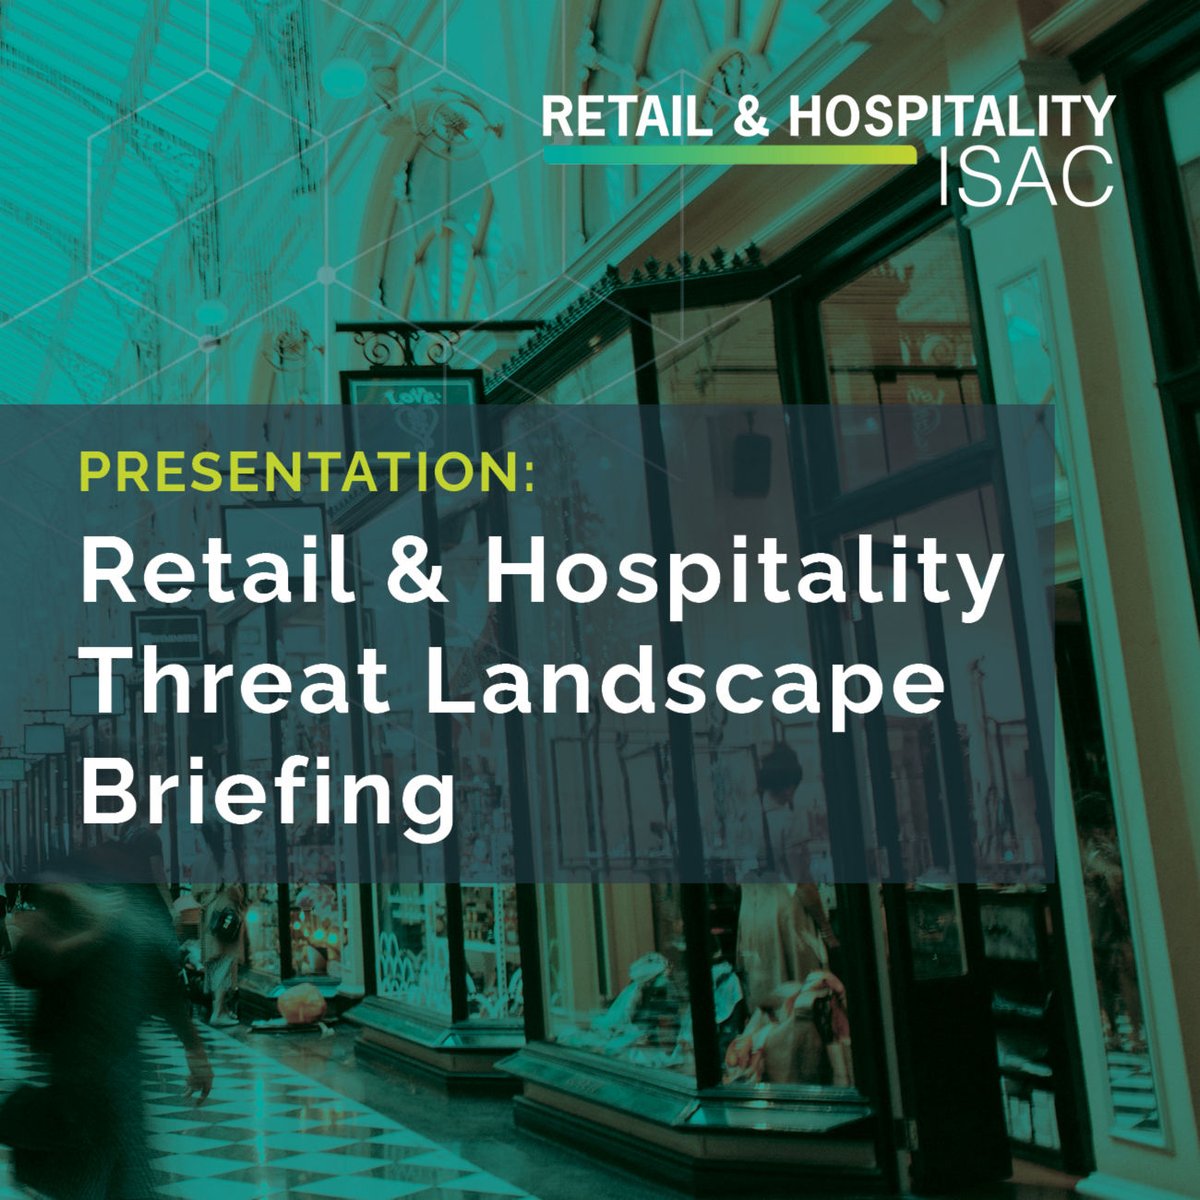 Join Associate Members, @DataDome, @Trustwave, and #VisaSystemsPaymentsIntelligence on October 12 at 1 p.m. ET for our Retail & Hospitality Threat Landscape Briefing. Register now: ow.ly/2lh850PSobc